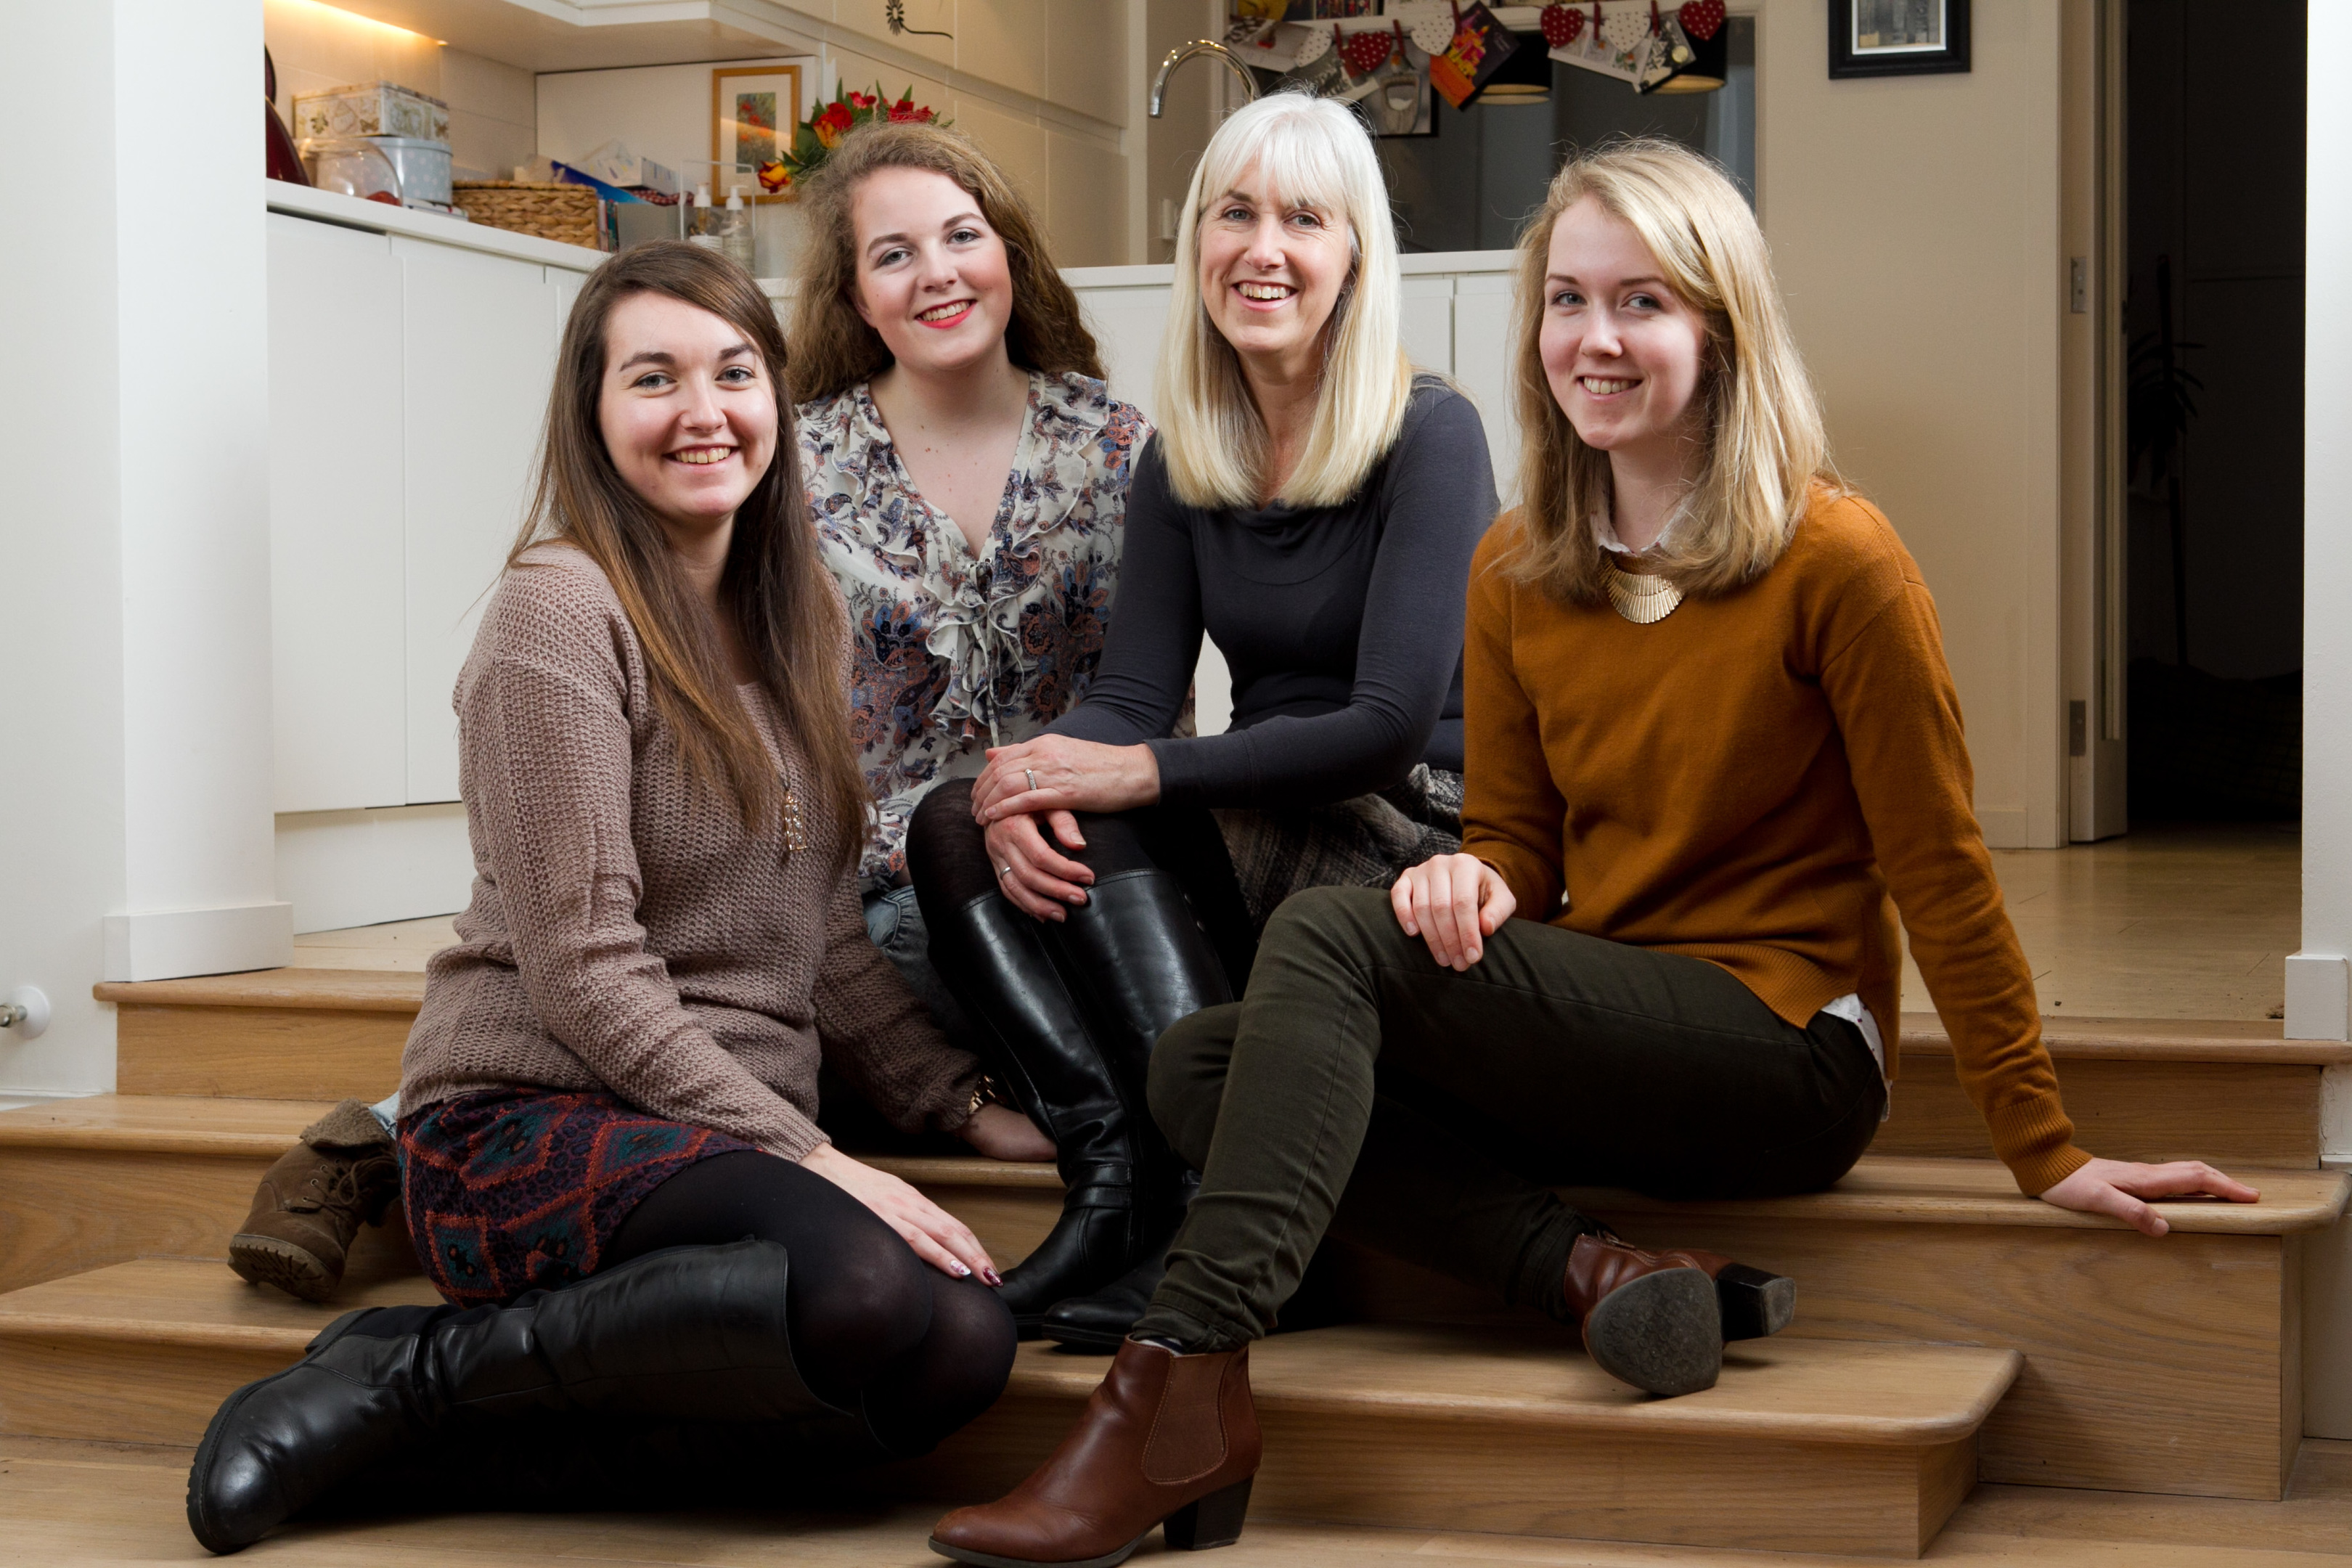 Hannah , Jess, Sally and Bethany (L-R) (Andrew Cawley / DC Thomson)